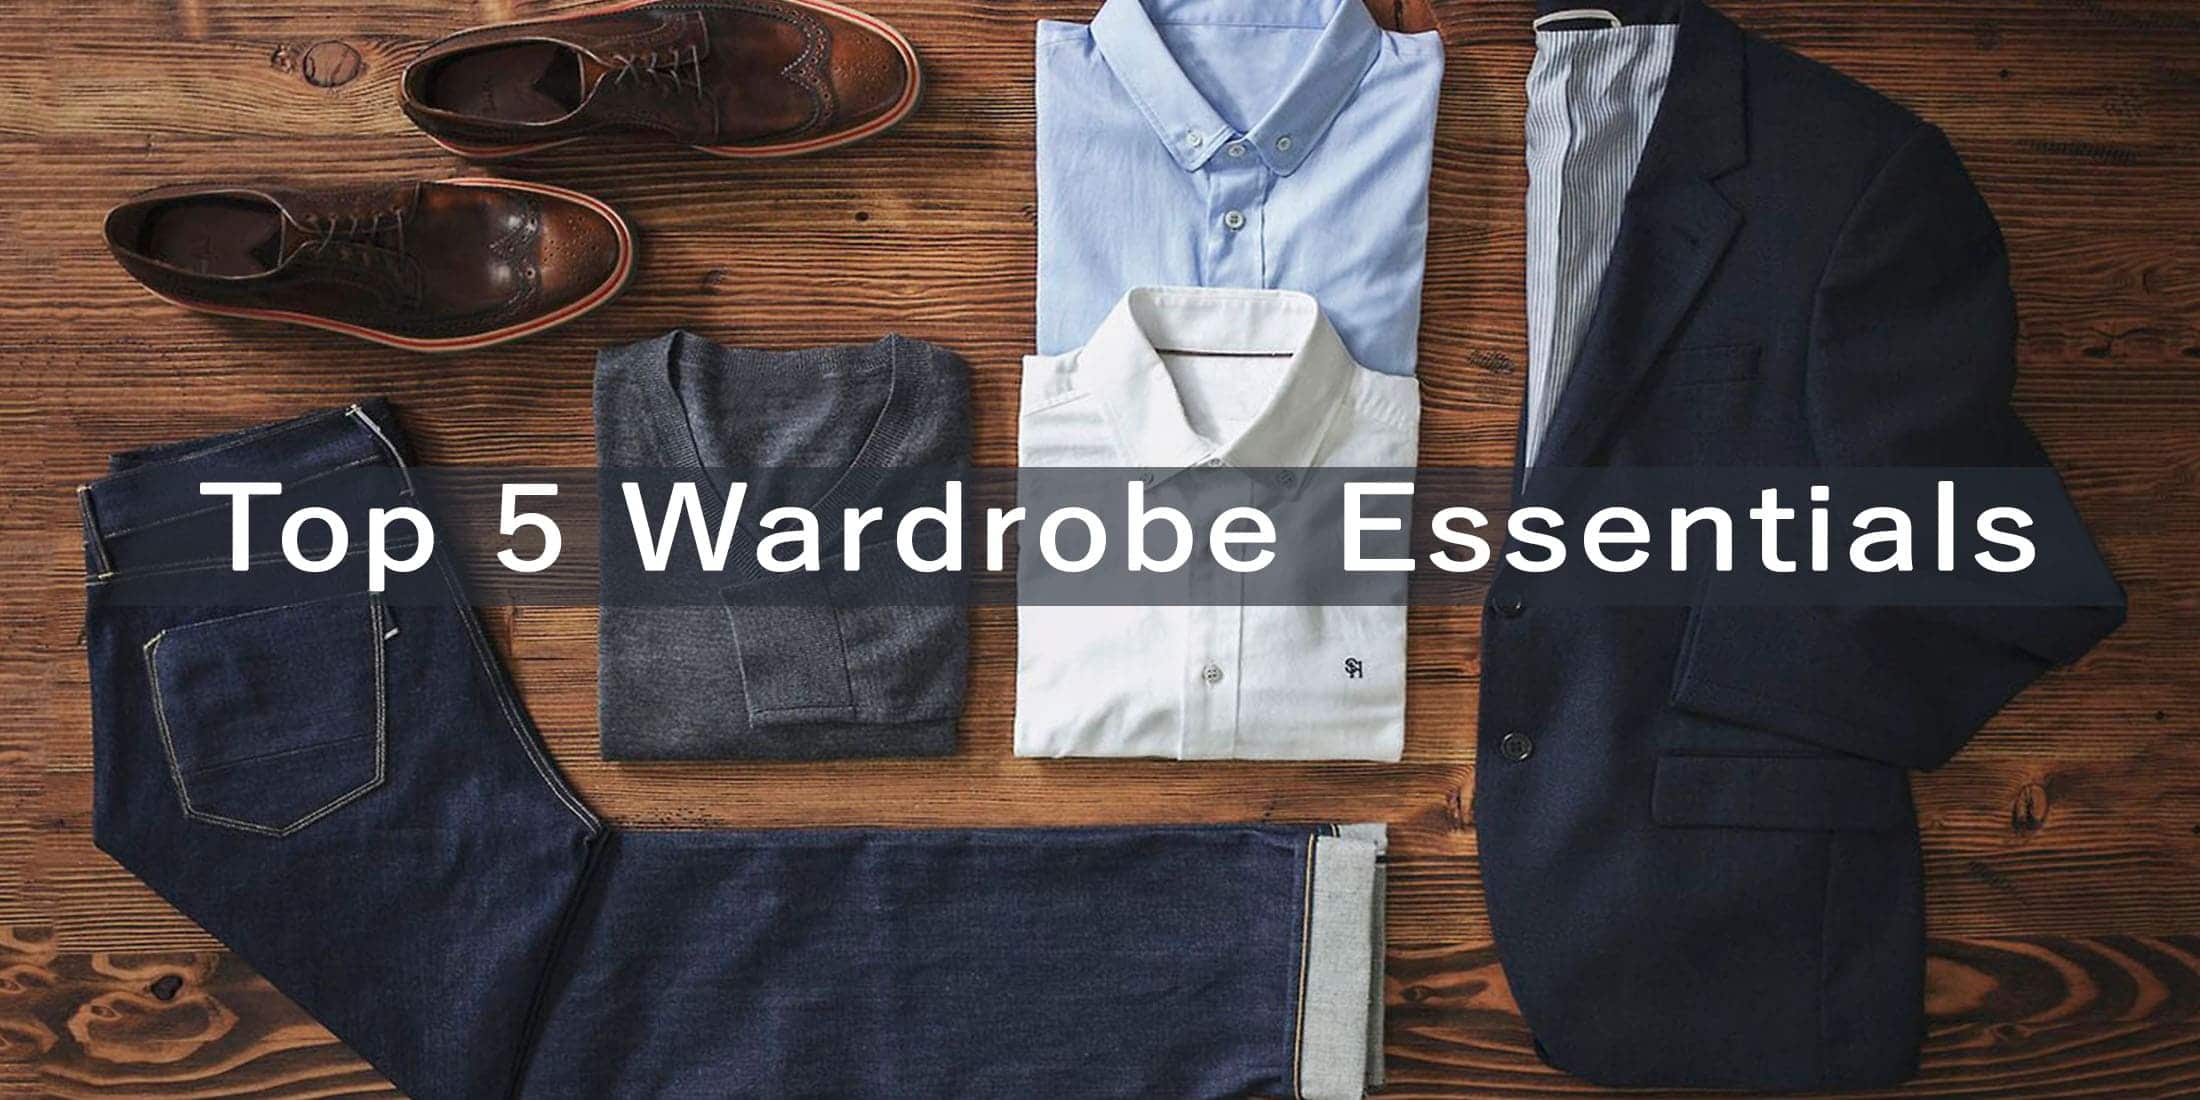 How To Build A Classic Wardrobe?